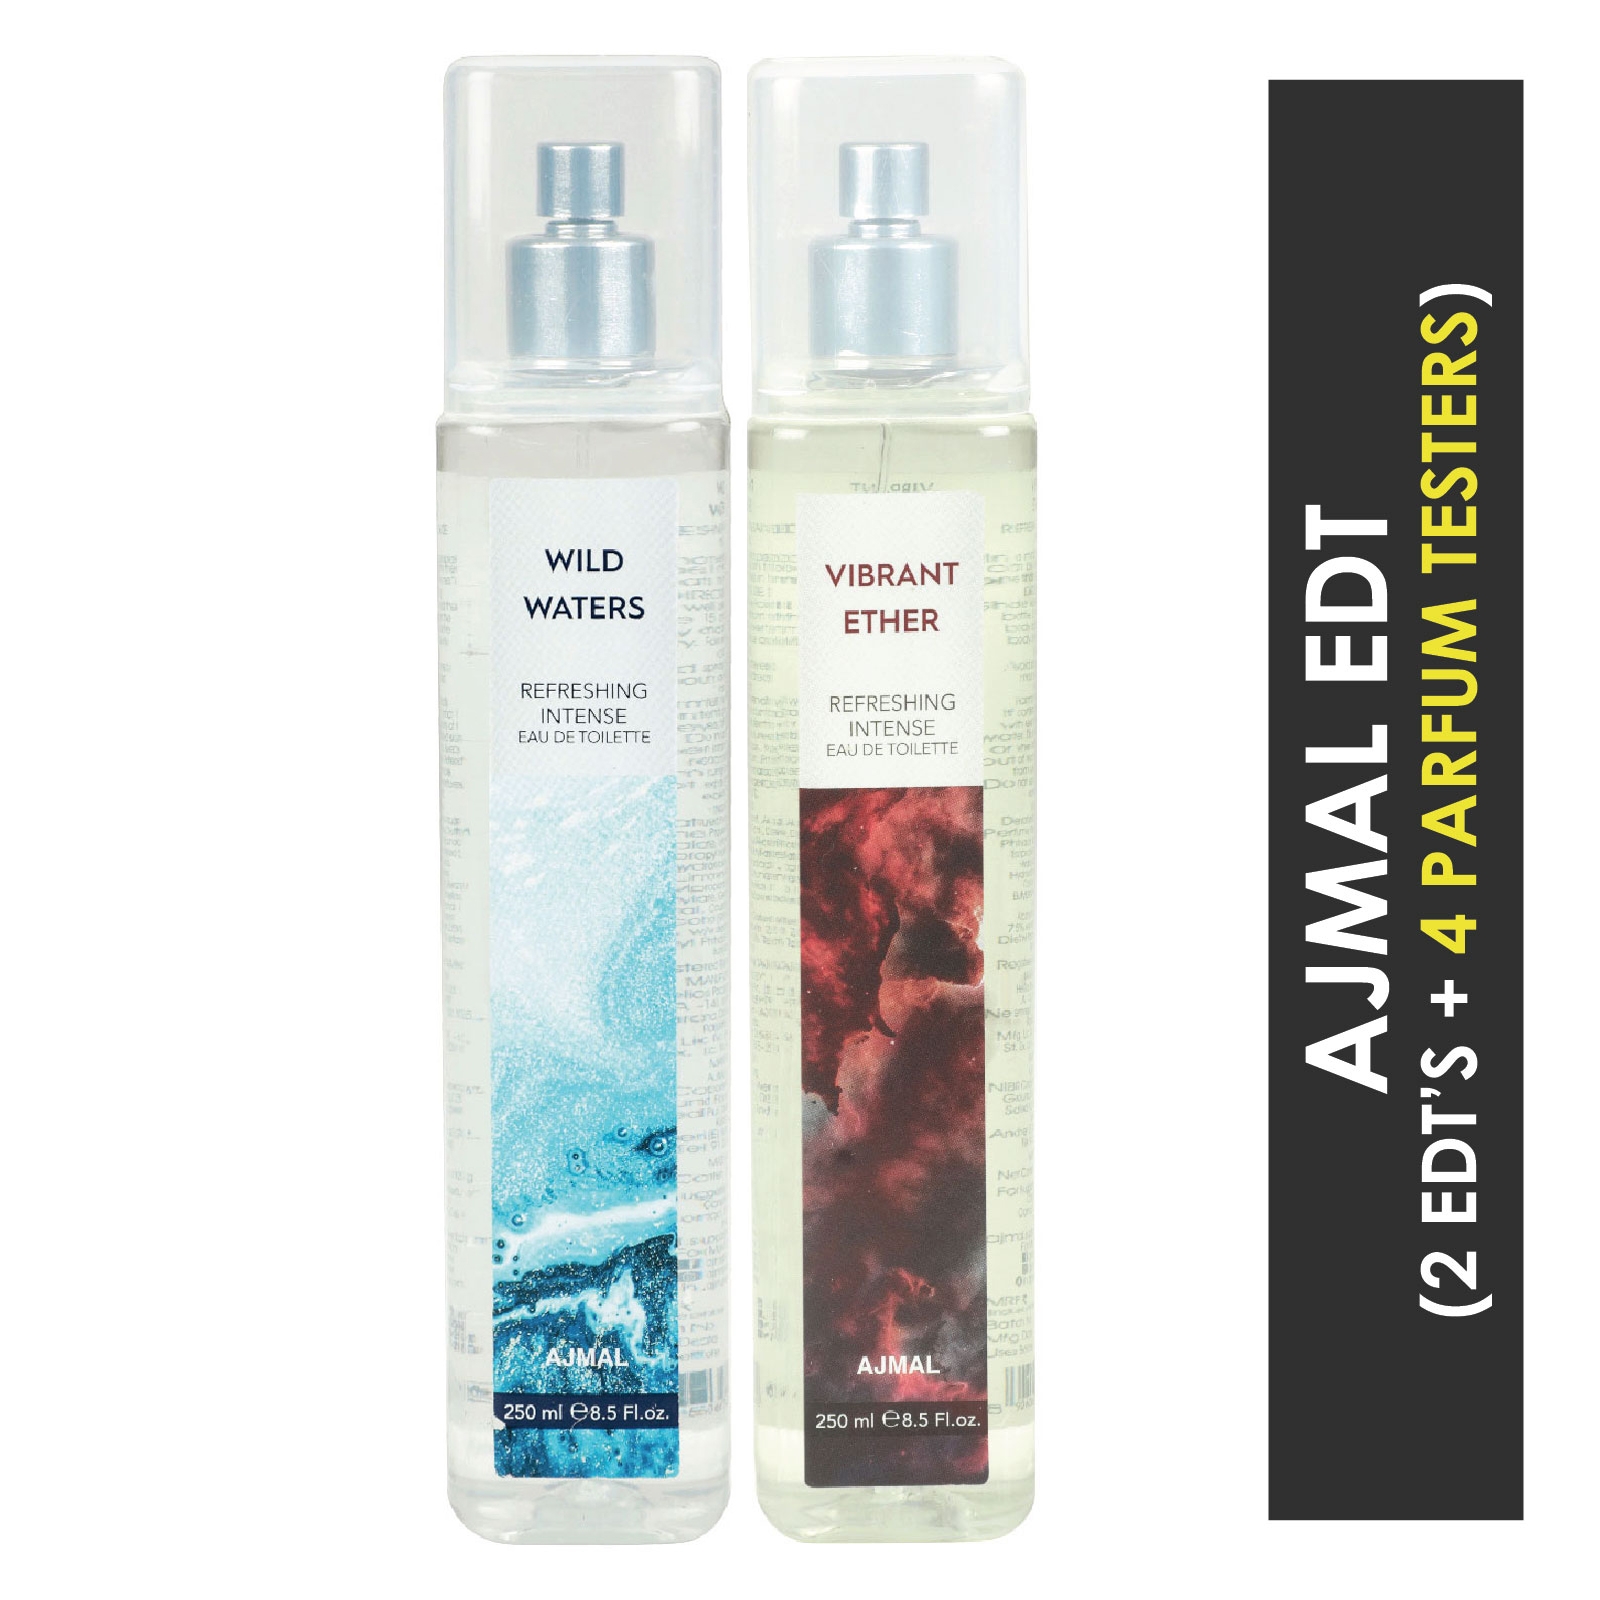 Ajmal | Ajmal Wild Waters EDT & Vibrant Ether EDT  pack of 2 each 250ml (Total 500ML) for Unisex + 4 Parfum Testers